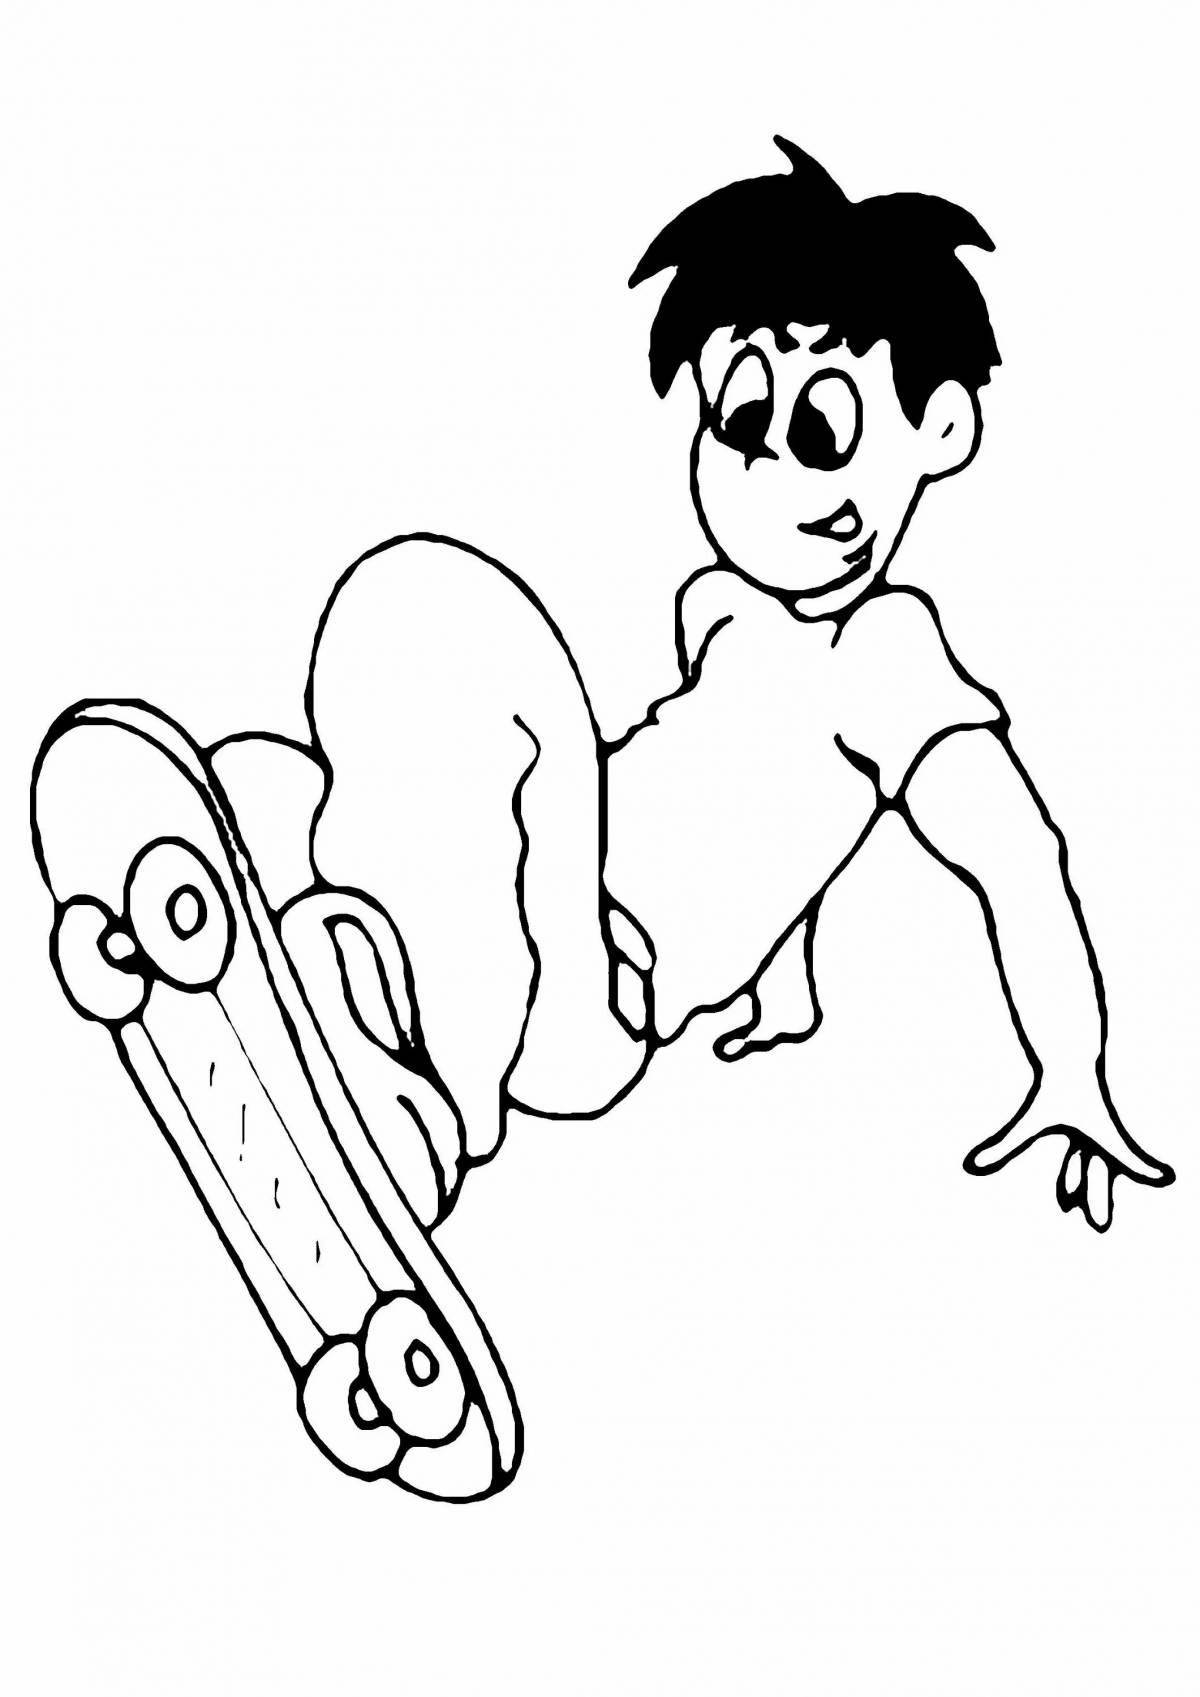 Coloring page graceful skateboarder